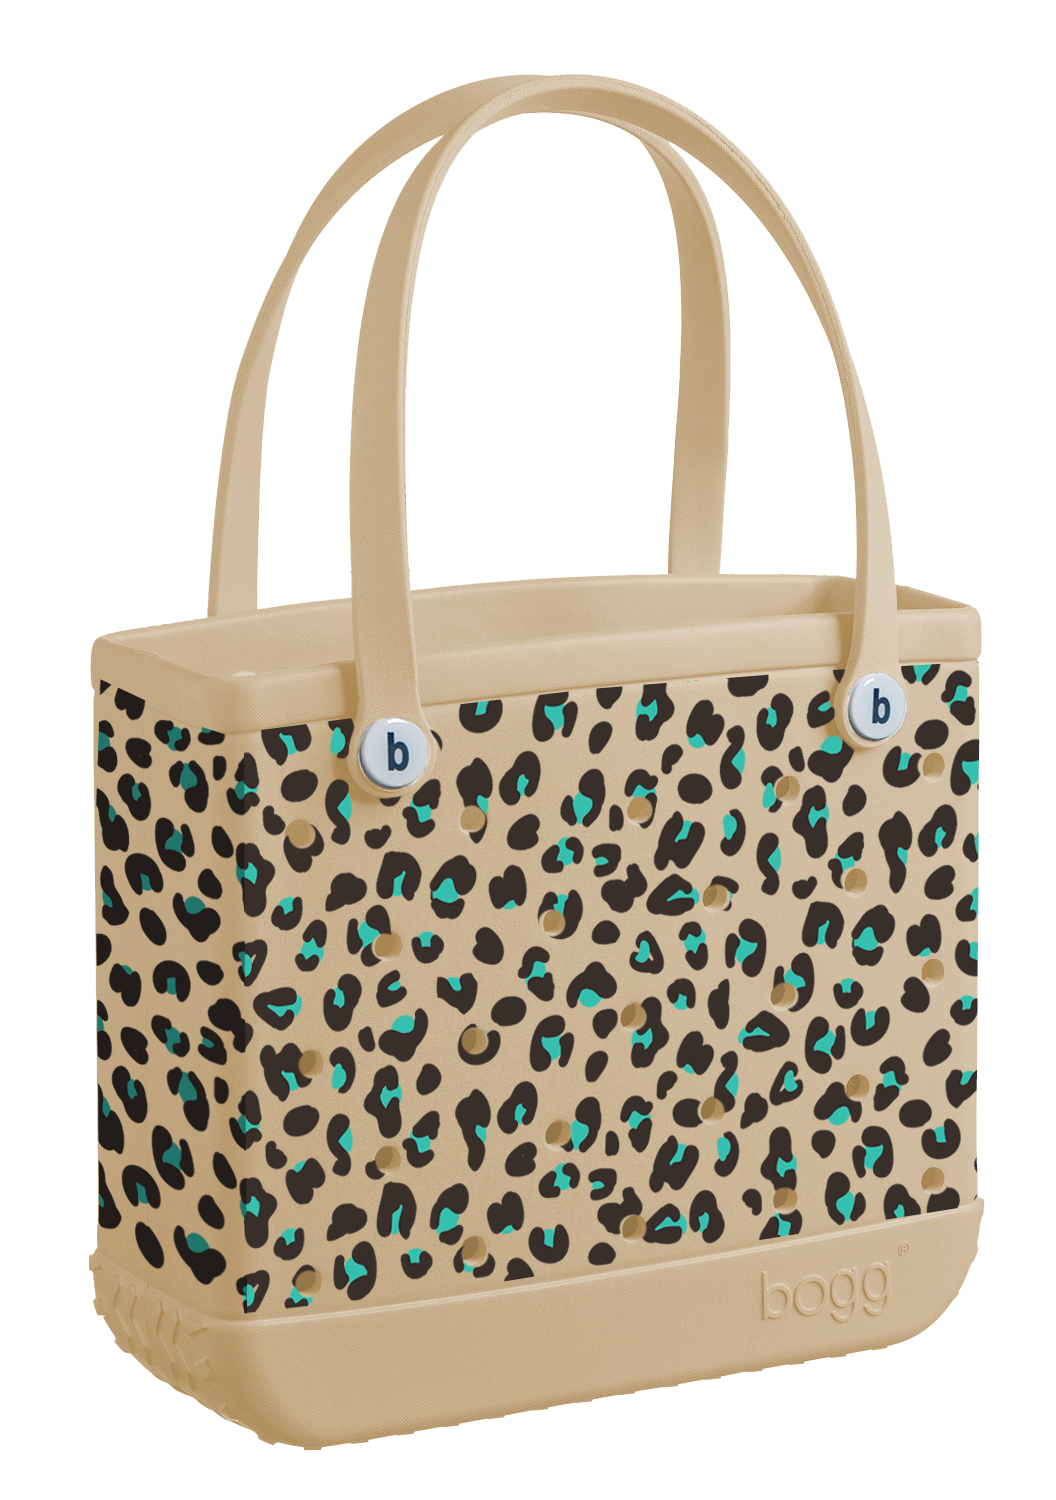 BB Teal Leopard Bogg, Small